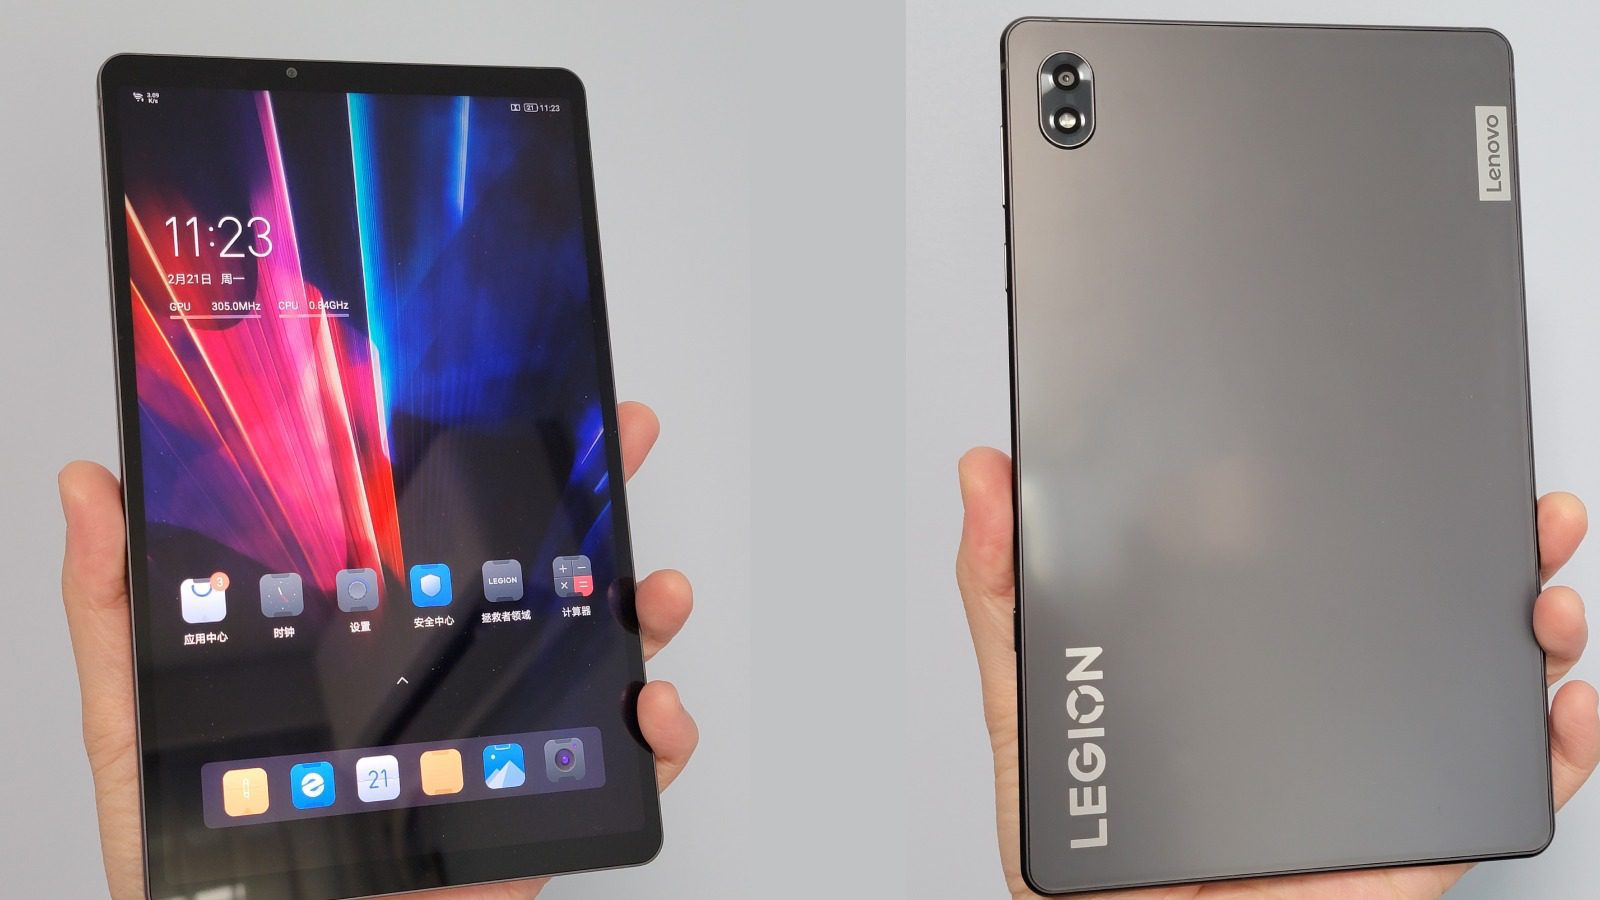 Upcoming Lenovo legion Y700 gaming tablet images revealed